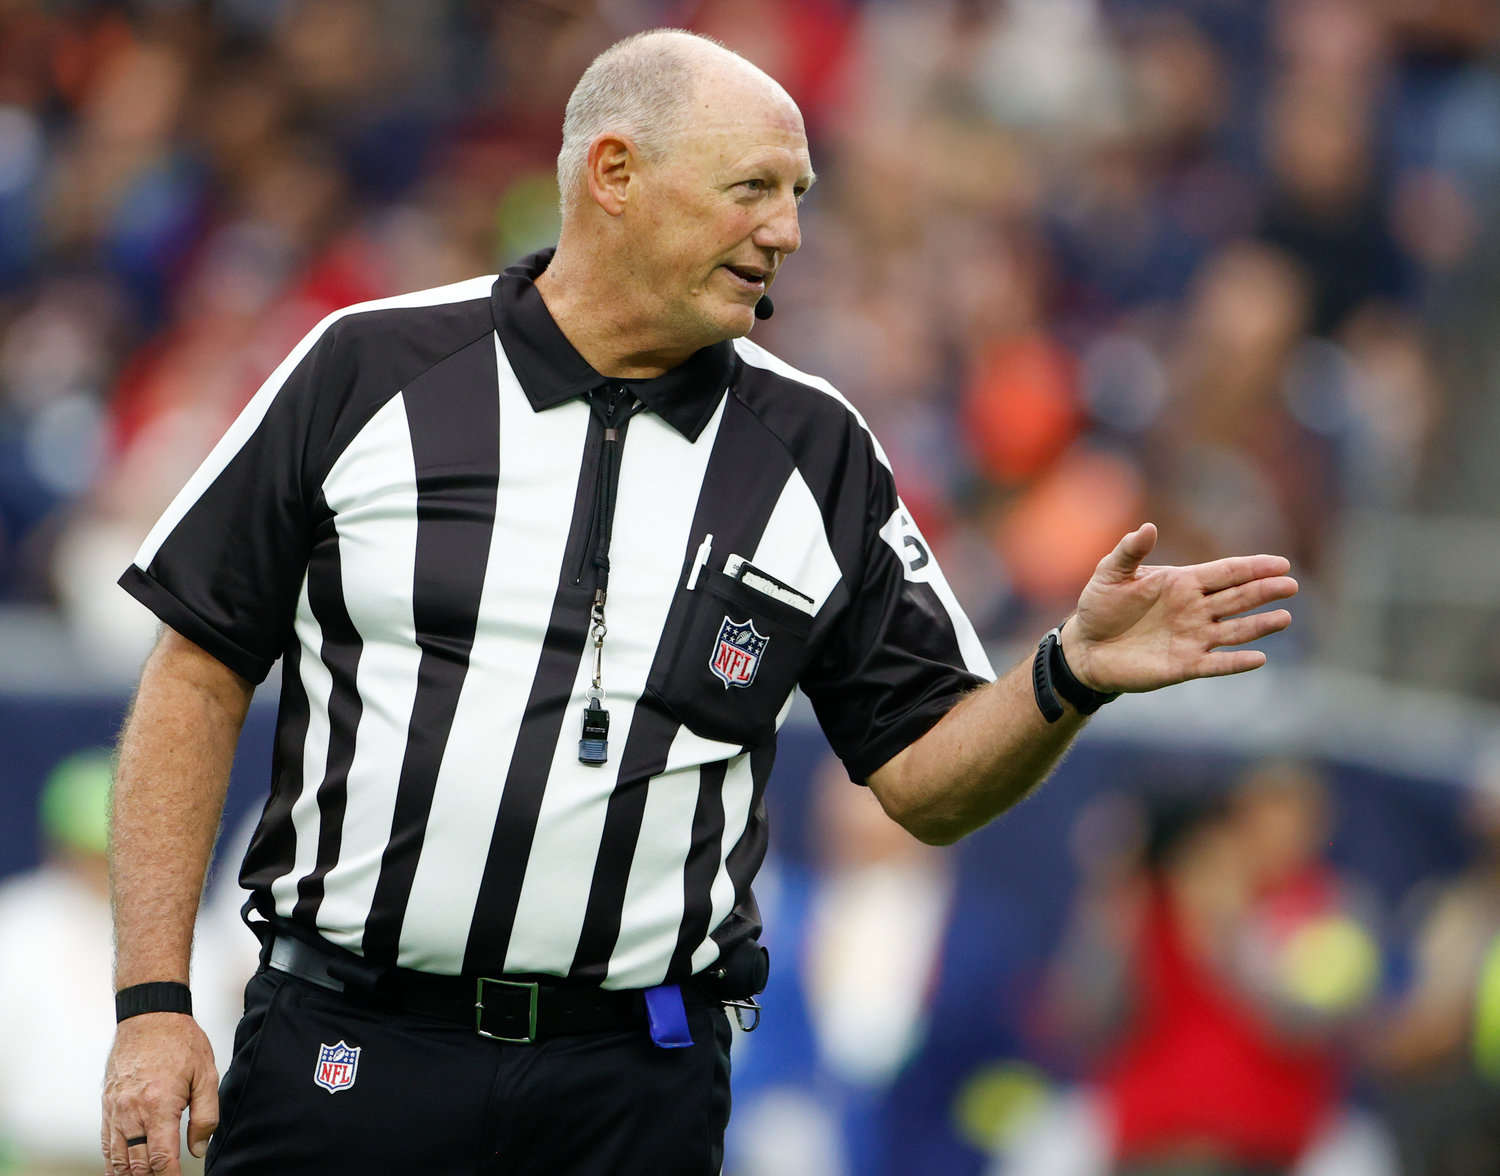 Umpire Paul King (121) during an NFL game between the Houston Texans and the Cleveland Browns on Dec. 4, 2022, in Houston. The Browns won, 27-14.